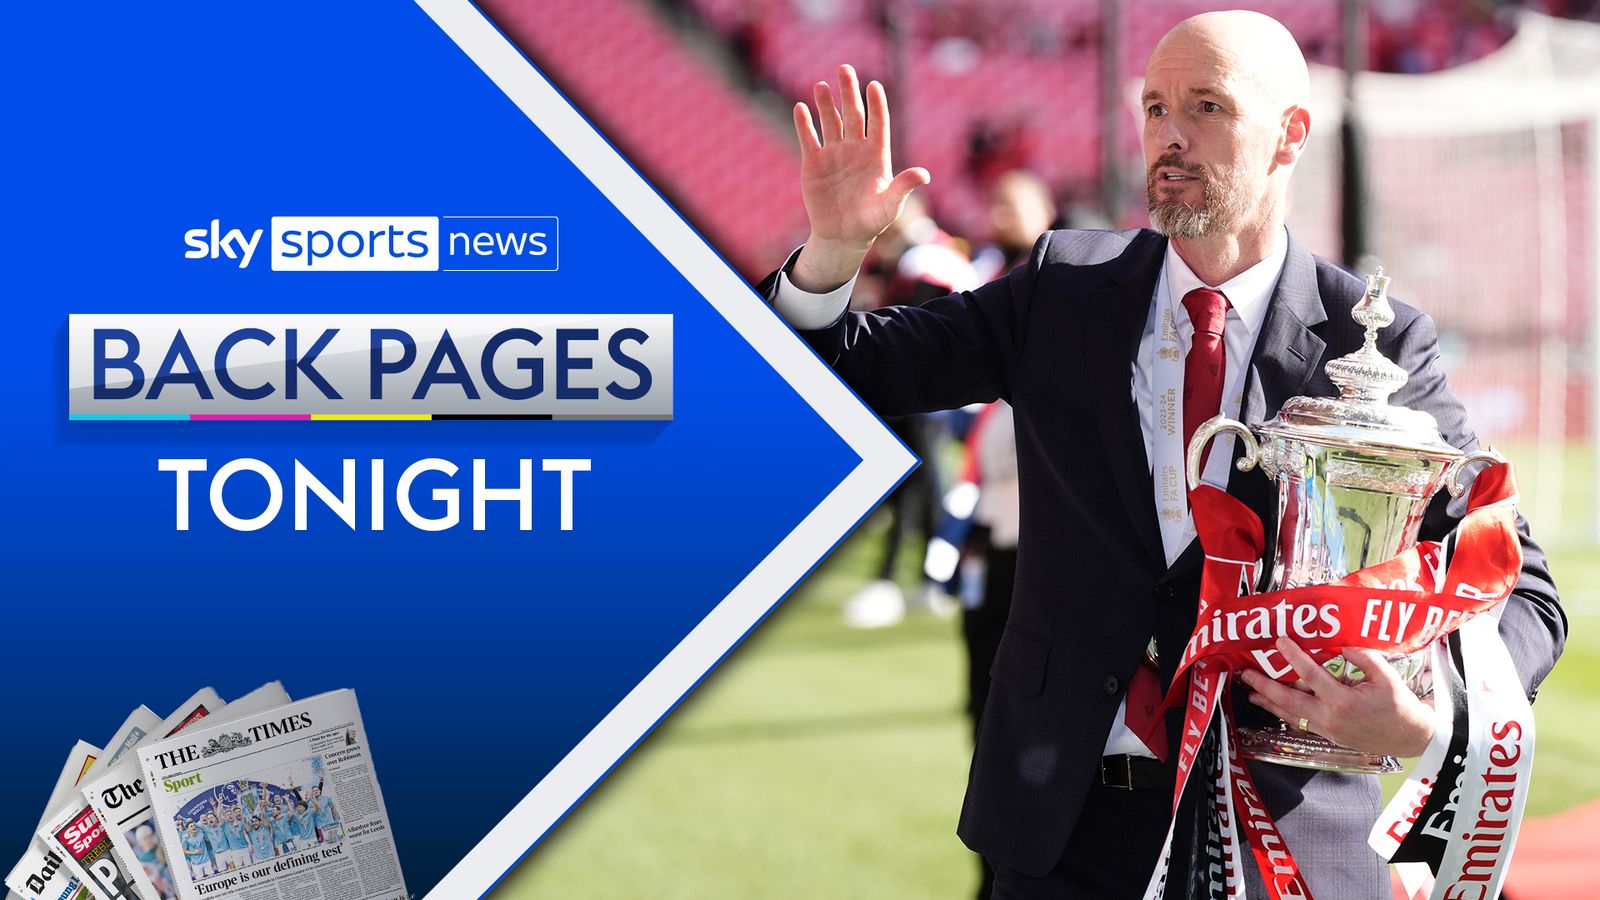 Back Pages Tonight: FA Cup win and injury situation may have helped Ten Hag